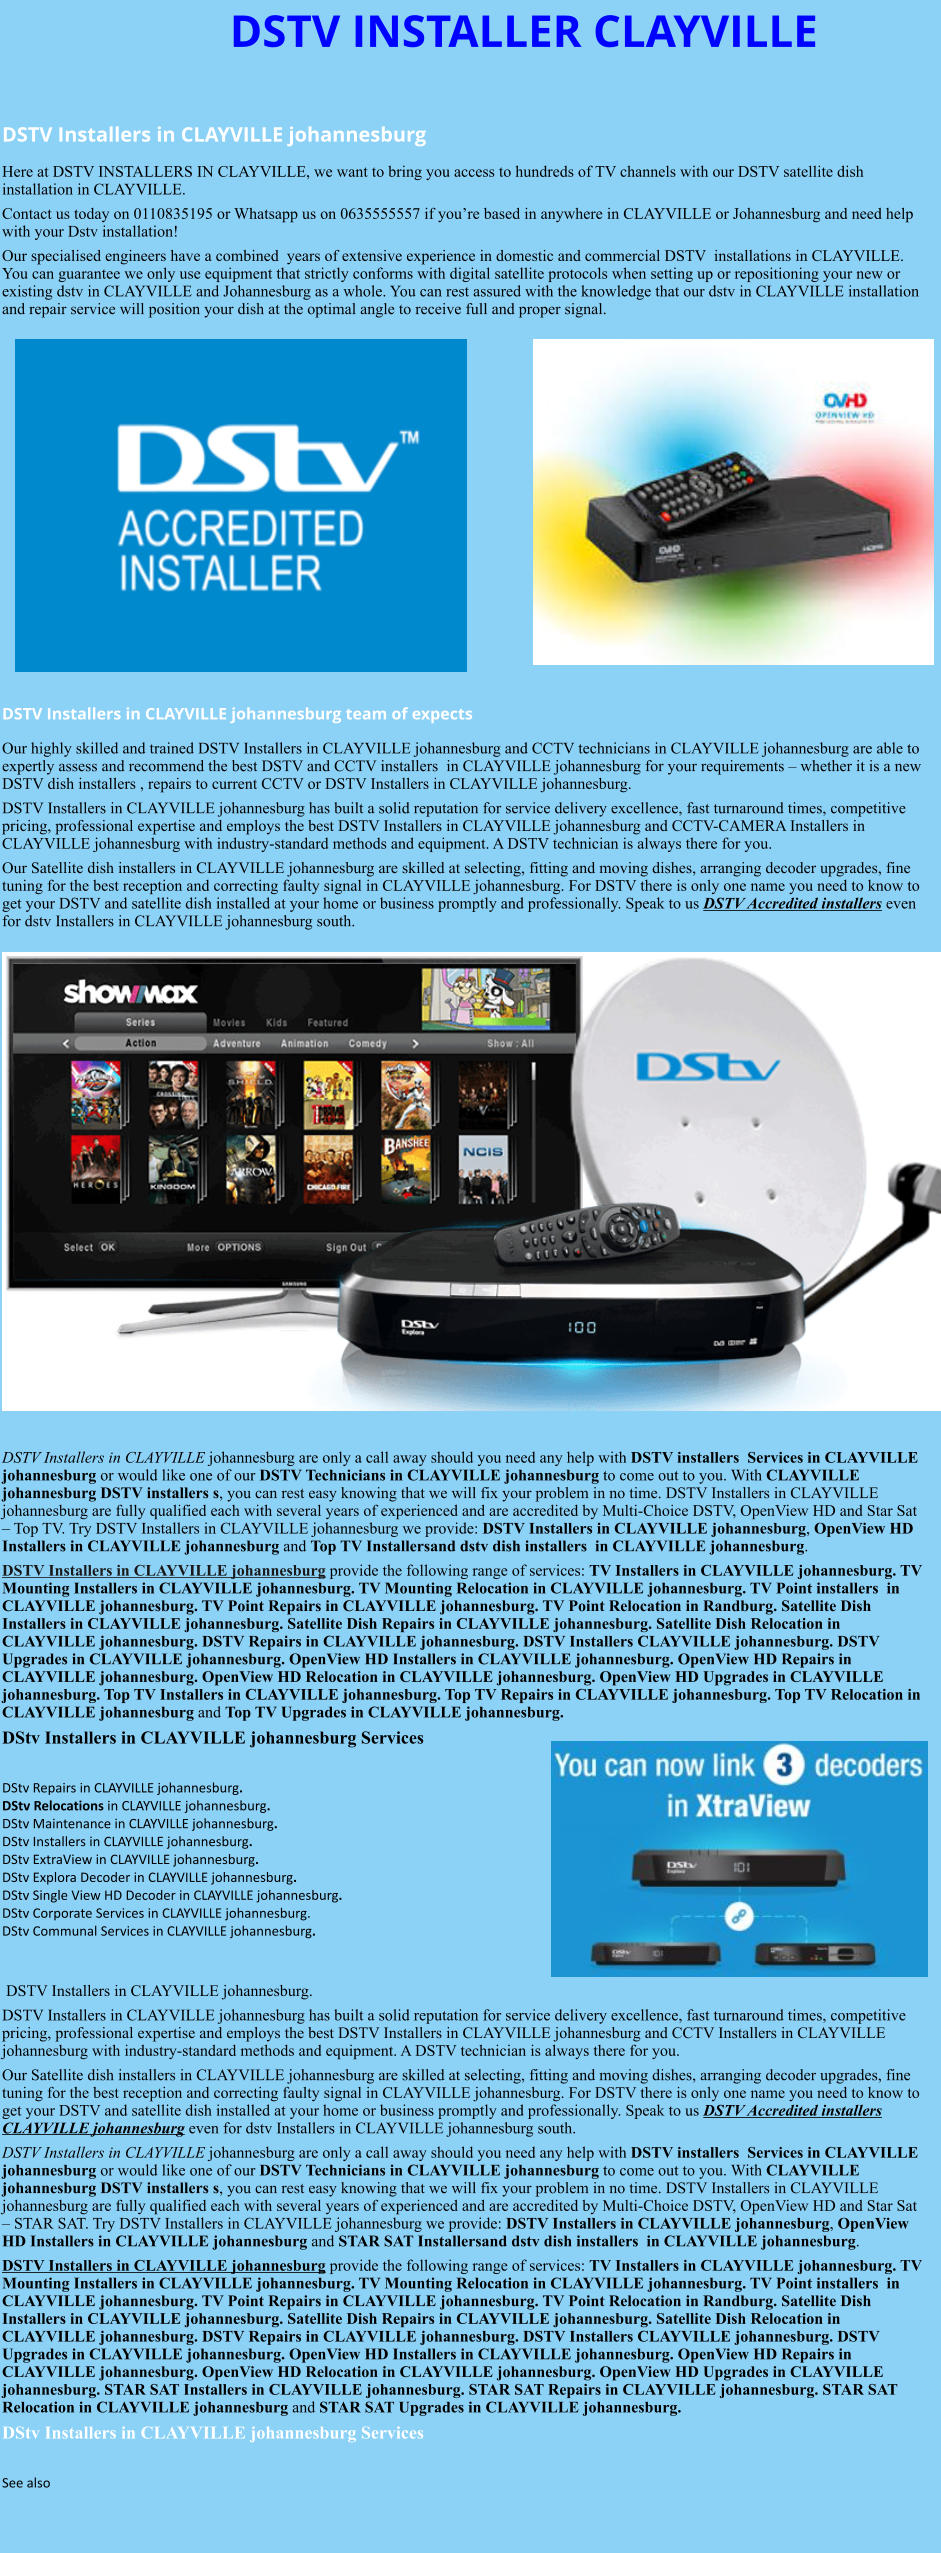 DSTV INSTALLER CLAYVILLE  DSTV Installers in CLAYVILLE johannesburg  Here at DSTV INSTALLERS IN CLAYVILLE, we want to bring you access to hundreds of TV channels with our DSTV satellite dish installation in CLAYVILLE. Contact us today on 0110835195 or Whatsapp us on 0635555557 if you’re based in anywhere in CLAYVILLE or Johannesburg and need help with your Dstv installation! Our specialised engineers have a combined  years of extensive experience in domestic and commercial DSTV  installations in CLAYVILLE. You can guarantee we only use equipment that strictly conforms with digital satellite protocols when setting up or repositioning your new or existing dstv in CLAYVILLE and Johannesburg as a whole. You can rest assured with the knowledge that our dstv in CLAYVILLE installation and repair service will position your dish at the optimal angle to receive full and proper signal.                DSTV Installers in CLAYVILLE johannesburg team of expects Our highly skilled and trained DSTV Installers in CLAYVILLE johannesburg and CCTV technicians in CLAYVILLE johannesburg are able to expertly assess and recommend the best DSTV and CCTV installers  in CLAYVILLE johannesburg for your requirements – whether it is a new DSTV dish installers , repairs to current CCTV or DSTV Installers in CLAYVILLE johannesburg. DSTV Installers in CLAYVILLE johannesburg has built a solid reputation for service delivery excellence, fast turnaround times, competitive pricing, professional expertise and employs the best DSTV Installers in CLAYVILLE johannesburg and CCTV-CAMERA Installers in CLAYVILLE johannesburg with industry-standard methods and equipment. A DSTV technician is always there for you. Our Satellite dish installers in CLAYVILLE johannesburg are skilled at selecting, fitting and moving dishes, arranging decoder upgrades, fine tuning for the best reception and correcting faulty signal in CLAYVILLE johannesburg. For DSTV there is only one name you need to know to get your DSTV and satellite dish installed at your home or business promptly and professionally. Speak to us DSTV Accredited installers even for dstv Installers in CLAYVILLE johannesburg south.                      DSTV Installers in CLAYVILLE johannesburg are only a call away should you need any help with DSTV installers  Services in CLAYVILLE johannesburg or would like one of our DSTV Technicians in CLAYVILLE johannesburg to come out to you. With CLAYVILLE johannesburg DSTV installers s, you can rest easy knowing that we will fix your problem in no time. DSTV Installers in CLAYVILLE johannesburg are fully qualified each with several years of experienced and are accredited by Multi-Choice DSTV, OpenView HD and Star Sat – Top TV. Try DSTV Installers in CLAYVILLE johannesburg we provide: DSTV Installers in CLAYVILLE johannesburg, OpenView HD Installers in CLAYVILLE johannesburg and Top TV Installersand dstv dish installers  in CLAYVILLE johannesburg. DSTV Installers in CLAYVILLE johannesburg provide the following range of services: TV Installers in CLAYVILLE johannesburg. TV Mounting Installers in CLAYVILLE johannesburg. TV Mounting Relocation in CLAYVILLE johannesburg. TV Point installers  in CLAYVILLE johannesburg. TV Point Repairs in CLAYVILLE johannesburg. TV Point Relocation in Randburg. Satellite Dish Installers in CLAYVILLE johannesburg. Satellite Dish Repairs in CLAYVILLE johannesburg. Satellite Dish Relocation in CLAYVILLE johannesburg. DSTV Repairs in CLAYVILLE johannesburg. DSTV Installers CLAYVILLE johannesburg. DSTV Upgrades in CLAYVILLE johannesburg. OpenView HD Installers in CLAYVILLE johannesburg. OpenView HD Repairs in CLAYVILLE johannesburg. OpenView HD Relocation in CLAYVILLE johannesburg. OpenView HD Upgrades in CLAYVILLE johannesburg. Top TV Installers in CLAYVILLE johannesburg. Top TV Repairs in CLAYVILLE johannesburg. Top TV Relocation in CLAYVILLE johannesburg and Top TV Upgrades in CLAYVILLE johannesburg. DStv Installers in CLAYVILLE johannesburg Services  DStv Repairs in CLAYVILLE johannesburg.  DStv Relocations in CLAYVILLE johannesburg.  DStv Maintenance in CLAYVILLE johannesburg. DStv Installers in CLAYVILLE johannesburg. DStv ExtraView in CLAYVILLE johannesburg. DStv Explora Decoder in CLAYVILLE johannesburg. DStv Single View HD Decoder in CLAYVILLE johannesburg. DStv Corporate Services in CLAYVILLE johannesburg. DStv Communal Services in CLAYVILLE johannesburg.    DSTV Installers in CLAYVILLE johannesburg. DSTV Installers in CLAYVILLE johannesburg has built a solid reputation for service delivery excellence, fast turnaround times, competitive pricing, professional expertise and employs the best DSTV Installers in CLAYVILLE johannesburg and CCTV Installers in CLAYVILLE johannesburg with industry-standard methods and equipment. A DSTV technician is always there for you. Our Satellite dish installers in CLAYVILLE johannesburg are skilled at selecting, fitting and moving dishes, arranging decoder upgrades, fine tuning for the best reception and correcting faulty signal in CLAYVILLE johannesburg. For DSTV there is only one name you need to know to get your DSTV and satellite dish installed at your home or business promptly and professionally. Speak to us DSTV Accredited installers CLAYVILLE johannesburg even for dstv Installers in CLAYVILLE johannesburg south. DSTV Installers in CLAYVILLE johannesburg are only a call away should you need any help with DSTV installers  Services in CLAYVILLE johannesburg or would like one of our DSTV Technicians in CLAYVILLE johannesburg to come out to you. With CLAYVILLE johannesburg DSTV installers s, you can rest easy knowing that we will fix your problem in no time. DSTV Installers in CLAYVILLE johannesburg are fully qualified each with several years of experienced and are accredited by Multi-Choice DSTV, OpenView HD and Star Sat – STAR SAT. Try DSTV Installers in CLAYVILLE johannesburg we provide: DSTV Installers in CLAYVILLE johannesburg, OpenView HD Installers in CLAYVILLE johannesburg and STAR SAT Installersand dstv dish installers  in CLAYVILLE johannesburg. DSTV Installers in CLAYVILLE johannesburg provide the following range of services: TV Installers in CLAYVILLE johannesburg. TV Mounting Installers in CLAYVILLE johannesburg. TV Mounting Relocation in CLAYVILLE johannesburg. TV Point installers  in CLAYVILLE johannesburg. TV Point Repairs in CLAYVILLE johannesburg. TV Point Relocation in Randburg. Satellite Dish Installers in CLAYVILLE johannesburg. Satellite Dish Repairs in CLAYVILLE johannesburg. Satellite Dish Relocation in CLAYVILLE johannesburg. DSTV Repairs in CLAYVILLE johannesburg. DSTV Installers CLAYVILLE johannesburg. DSTV Upgrades in CLAYVILLE johannesburg. OpenView HD Installers in CLAYVILLE johannesburg. OpenView HD Repairs in CLAYVILLE johannesburg. OpenView HD Relocation in CLAYVILLE johannesburg. OpenView HD Upgrades in CLAYVILLE johannesburg. STAR SAT Installers in CLAYVILLE johannesburg. STAR SAT Repairs in CLAYVILLE johannesburg. STAR SAT Relocation in CLAYVILLE johannesburg and STAR SAT Upgrades in CLAYVILLE johannesburg. DStv Installers in CLAYVILLE johannesburg Services  See also